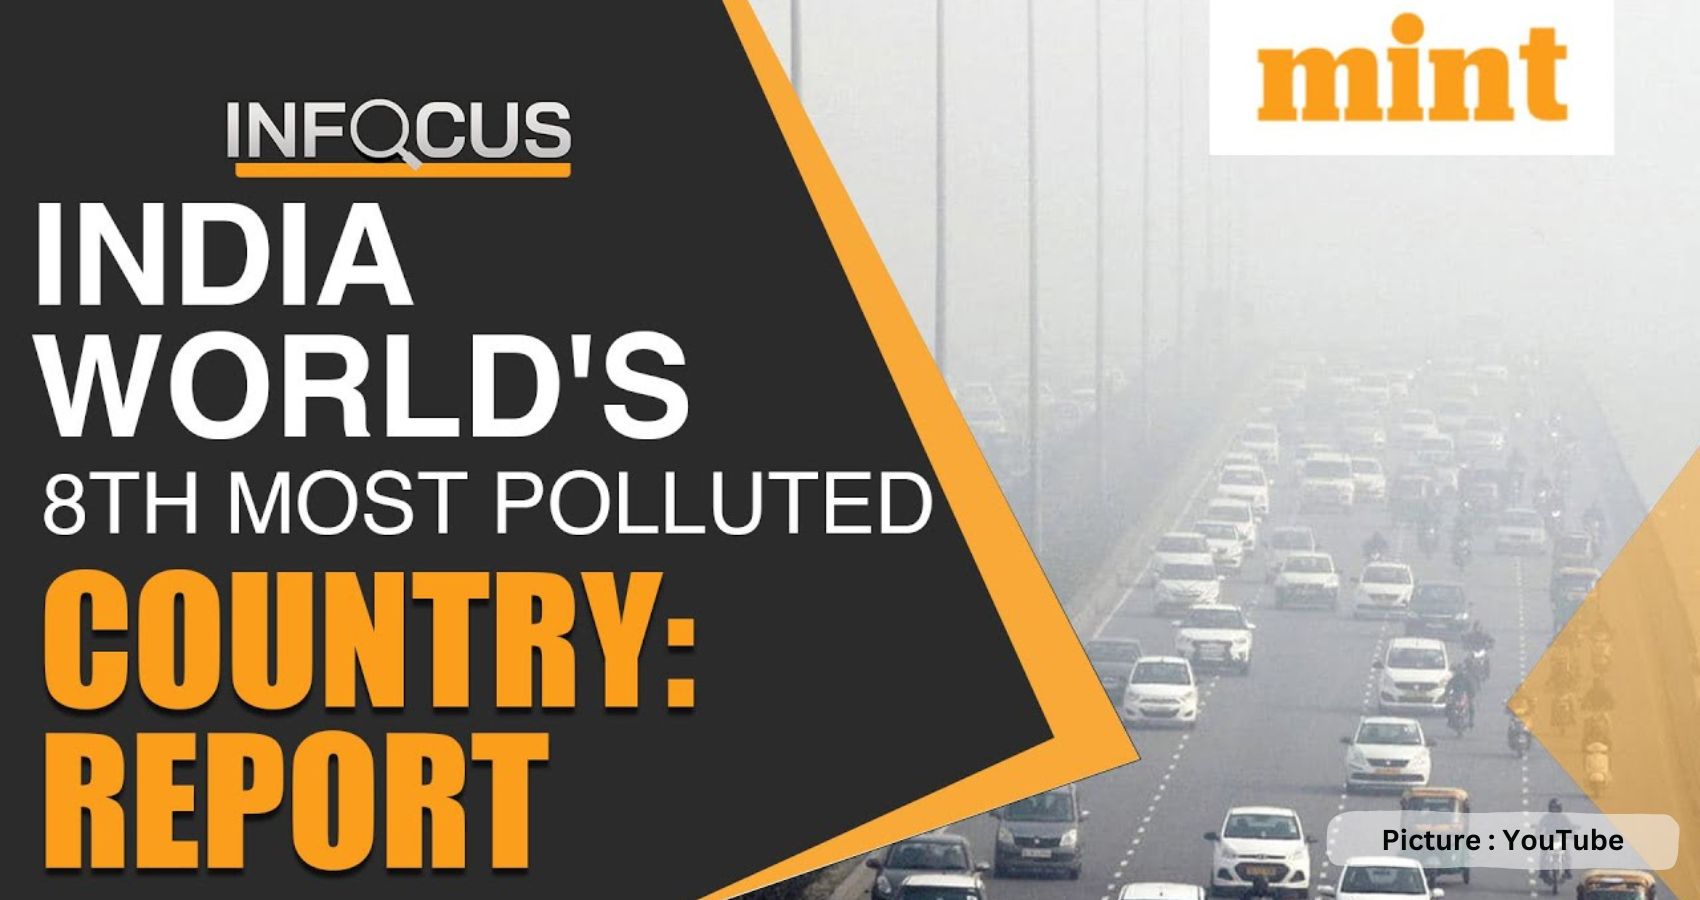 39 Indian Cities Among World’s 50 Most Polluted